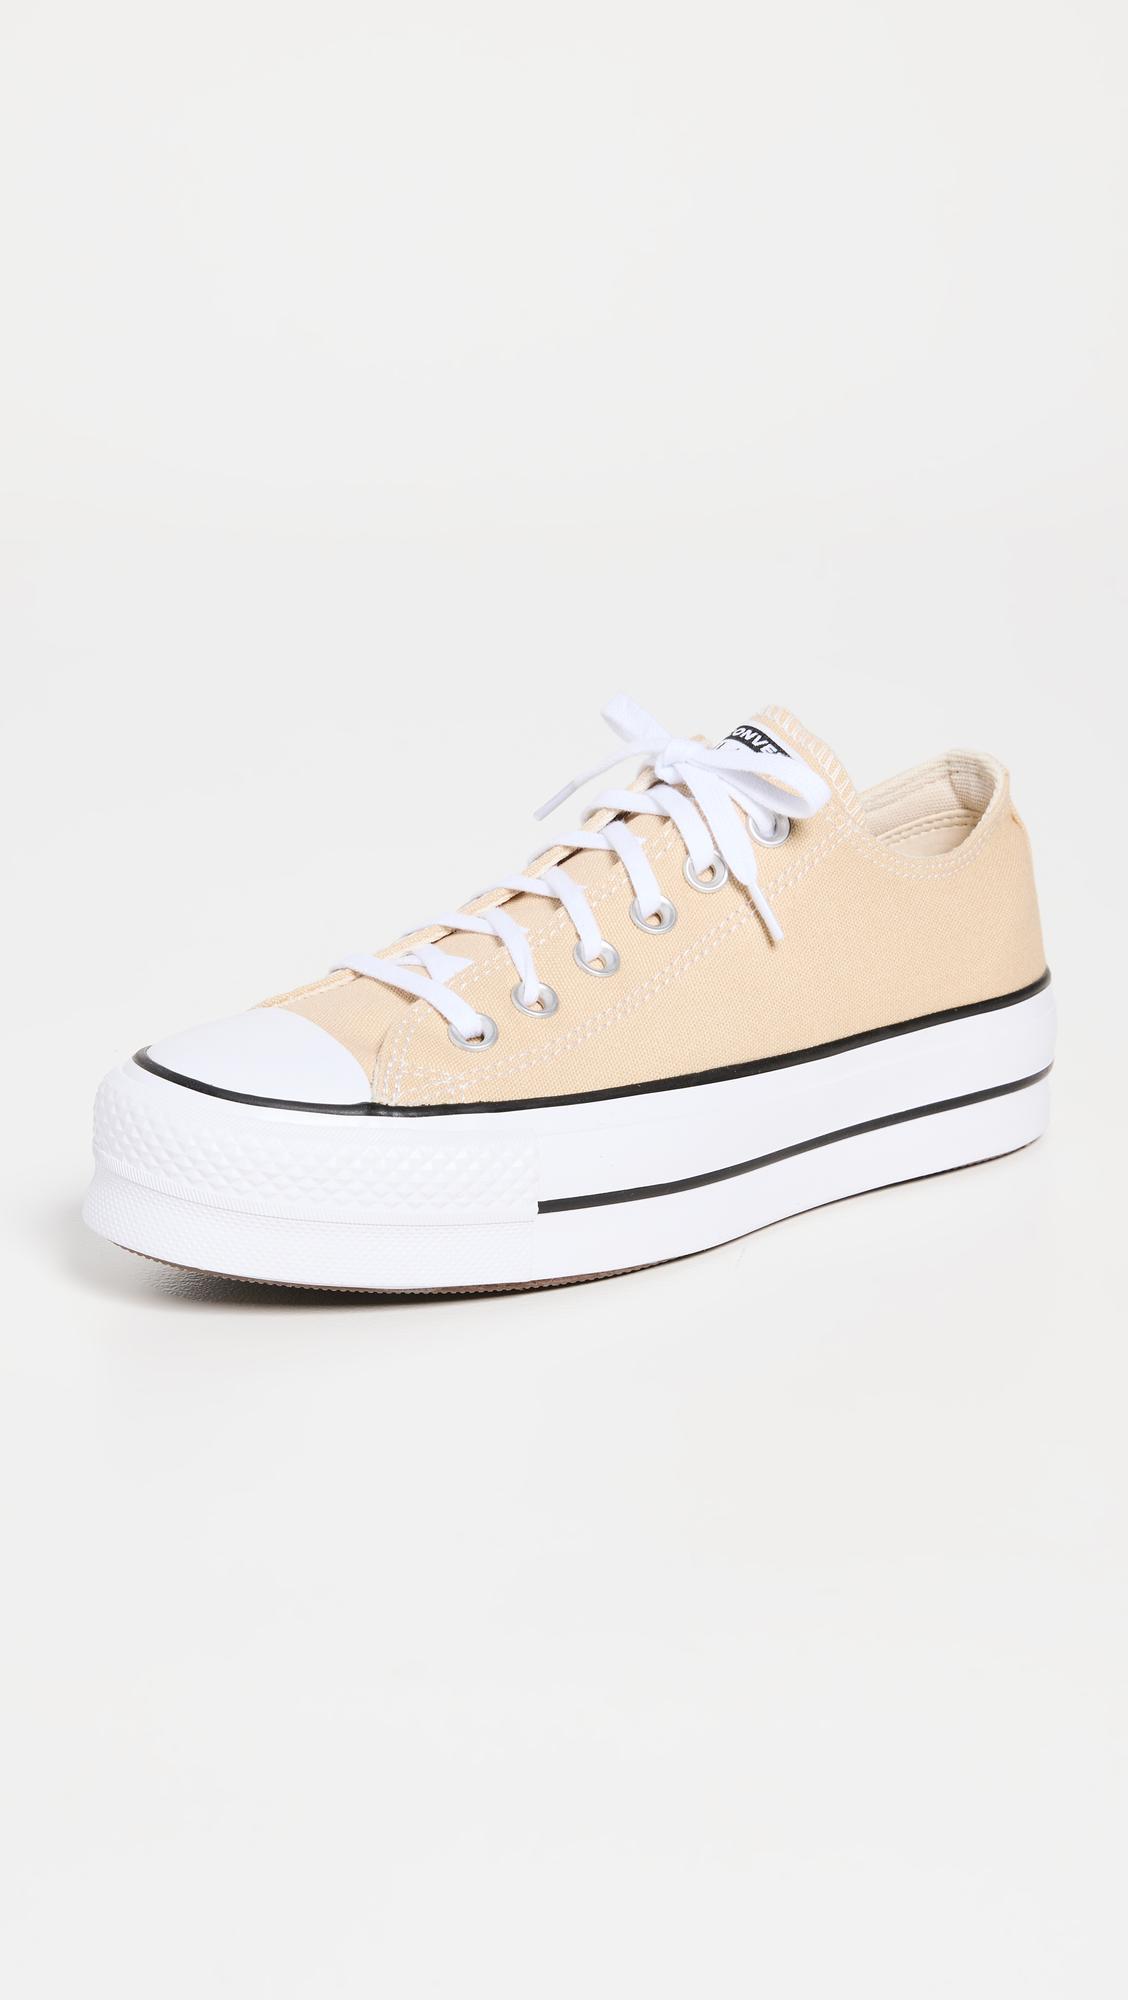 Converse Chuck Taylor All Star Lift Sneakers in White | Lyst